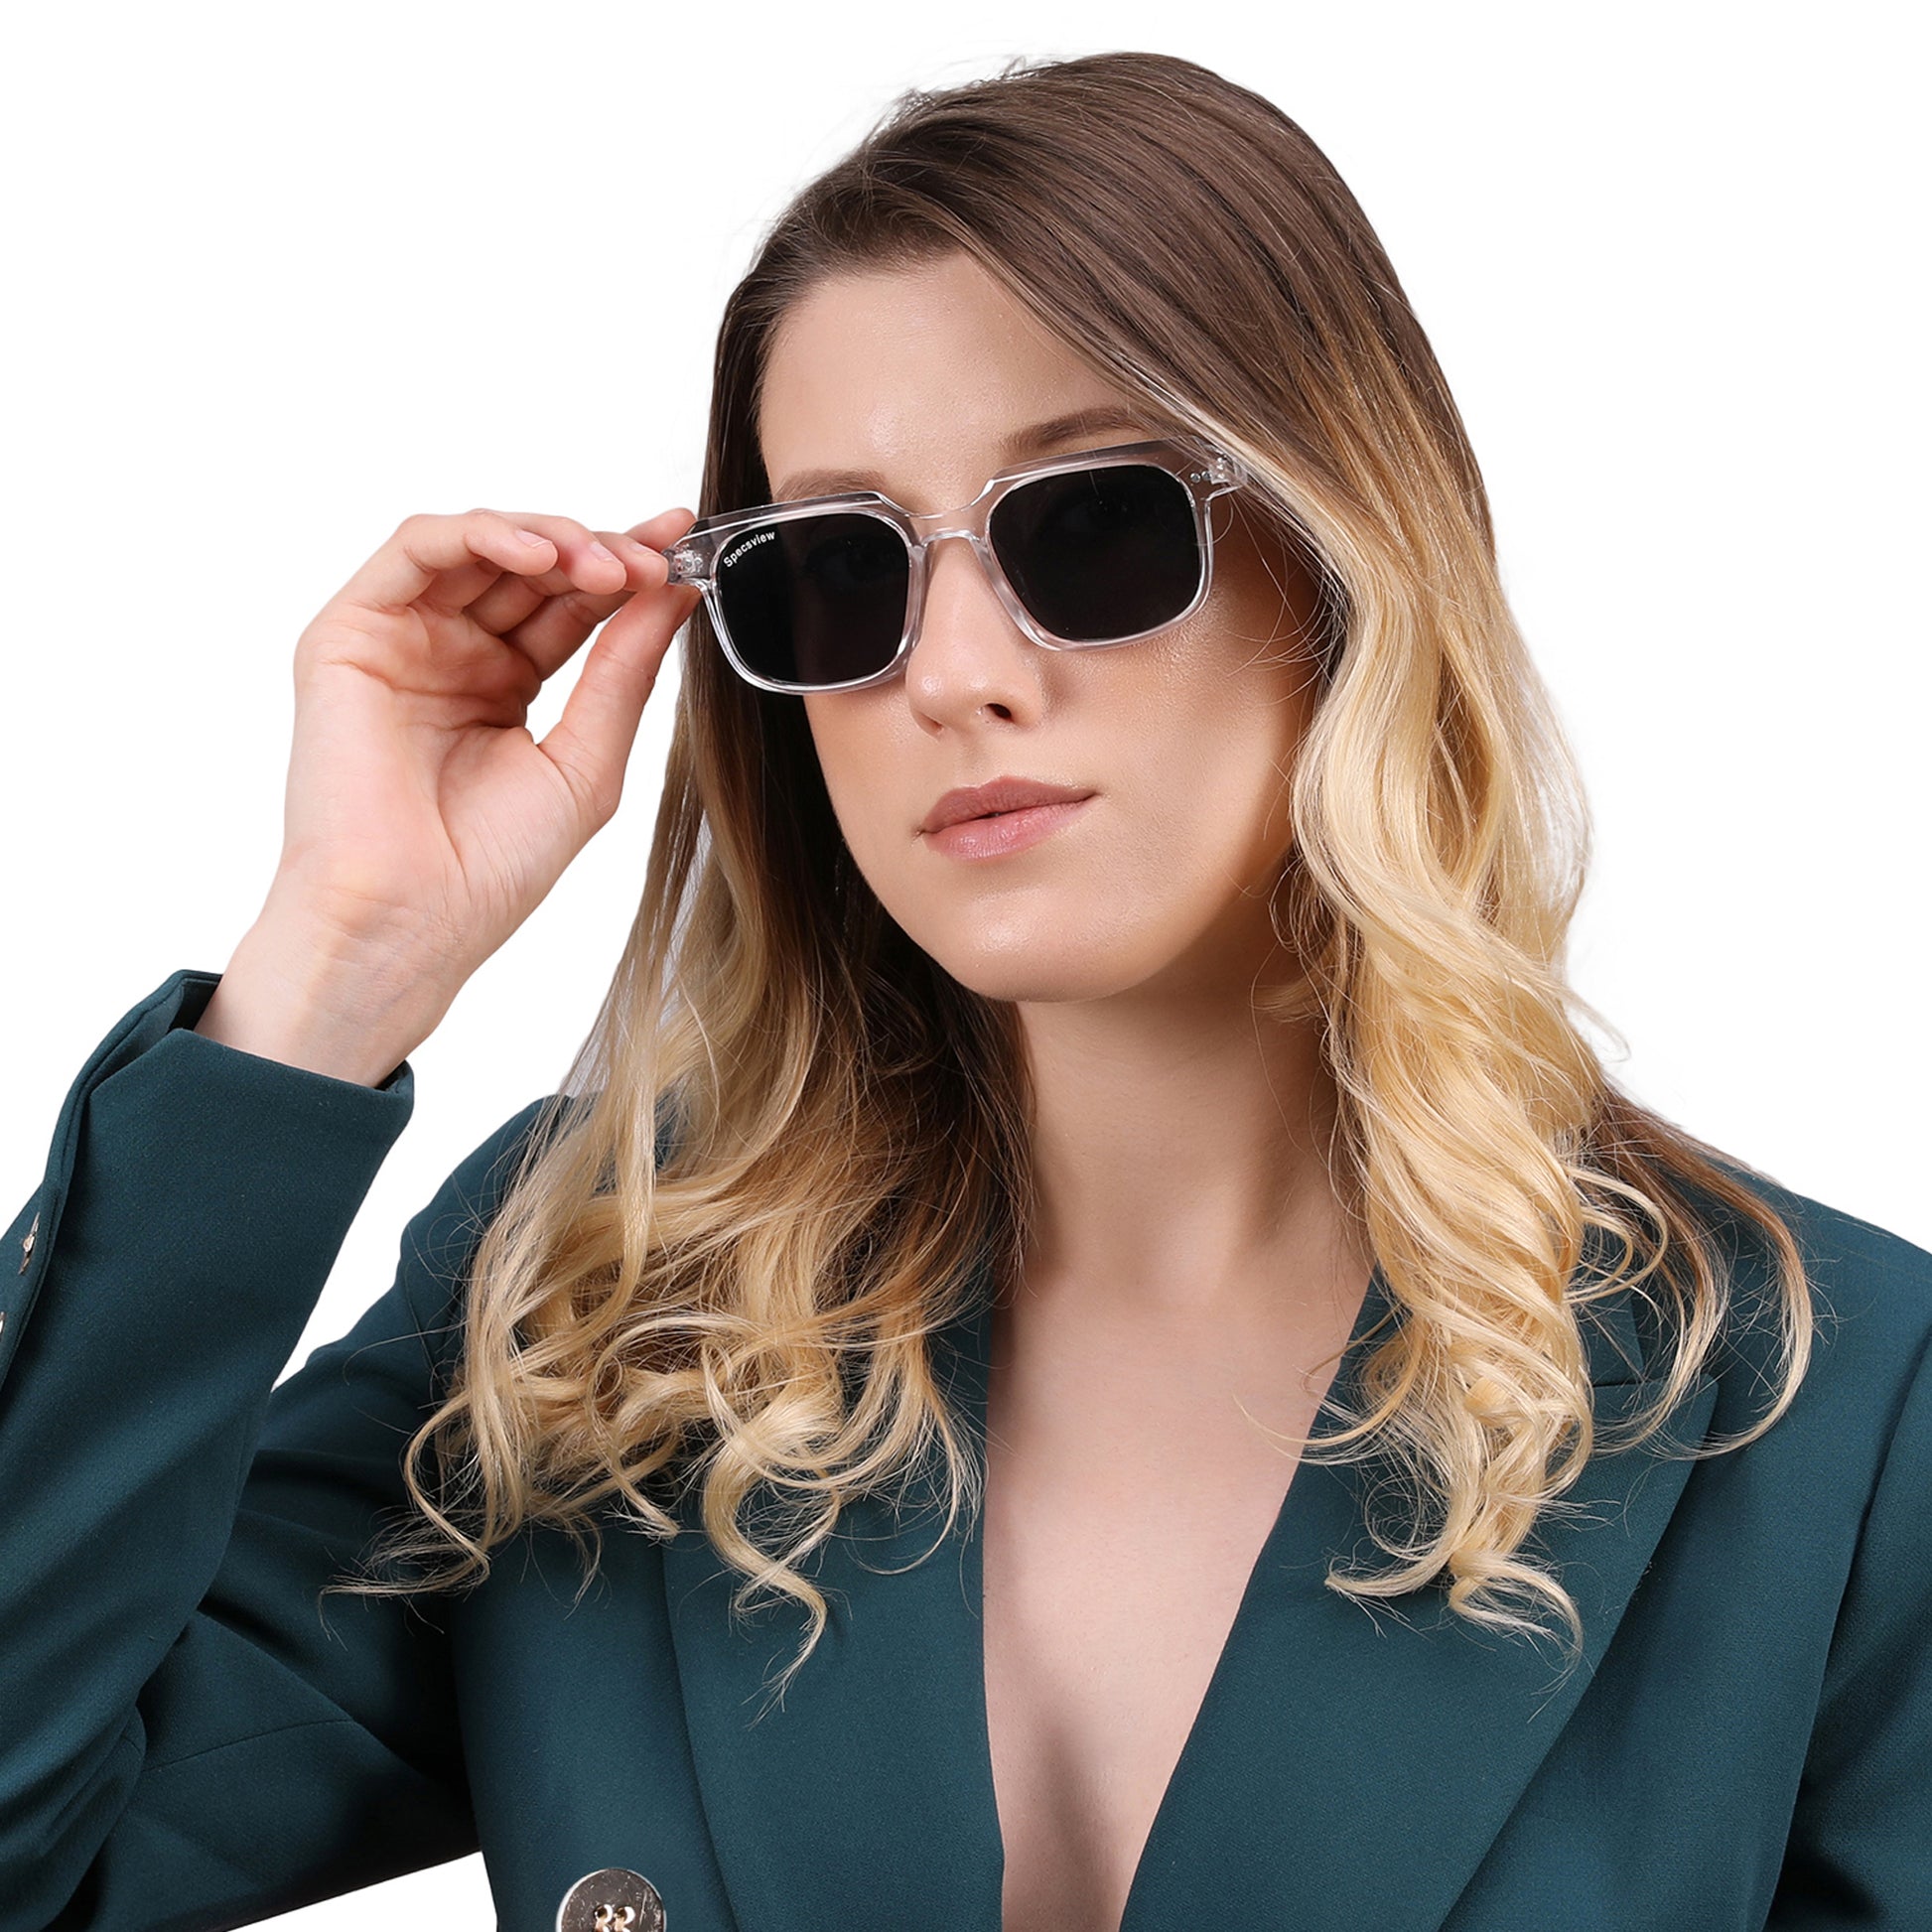 DIRK//001 I Sunglasses for Men and Women - Specsview